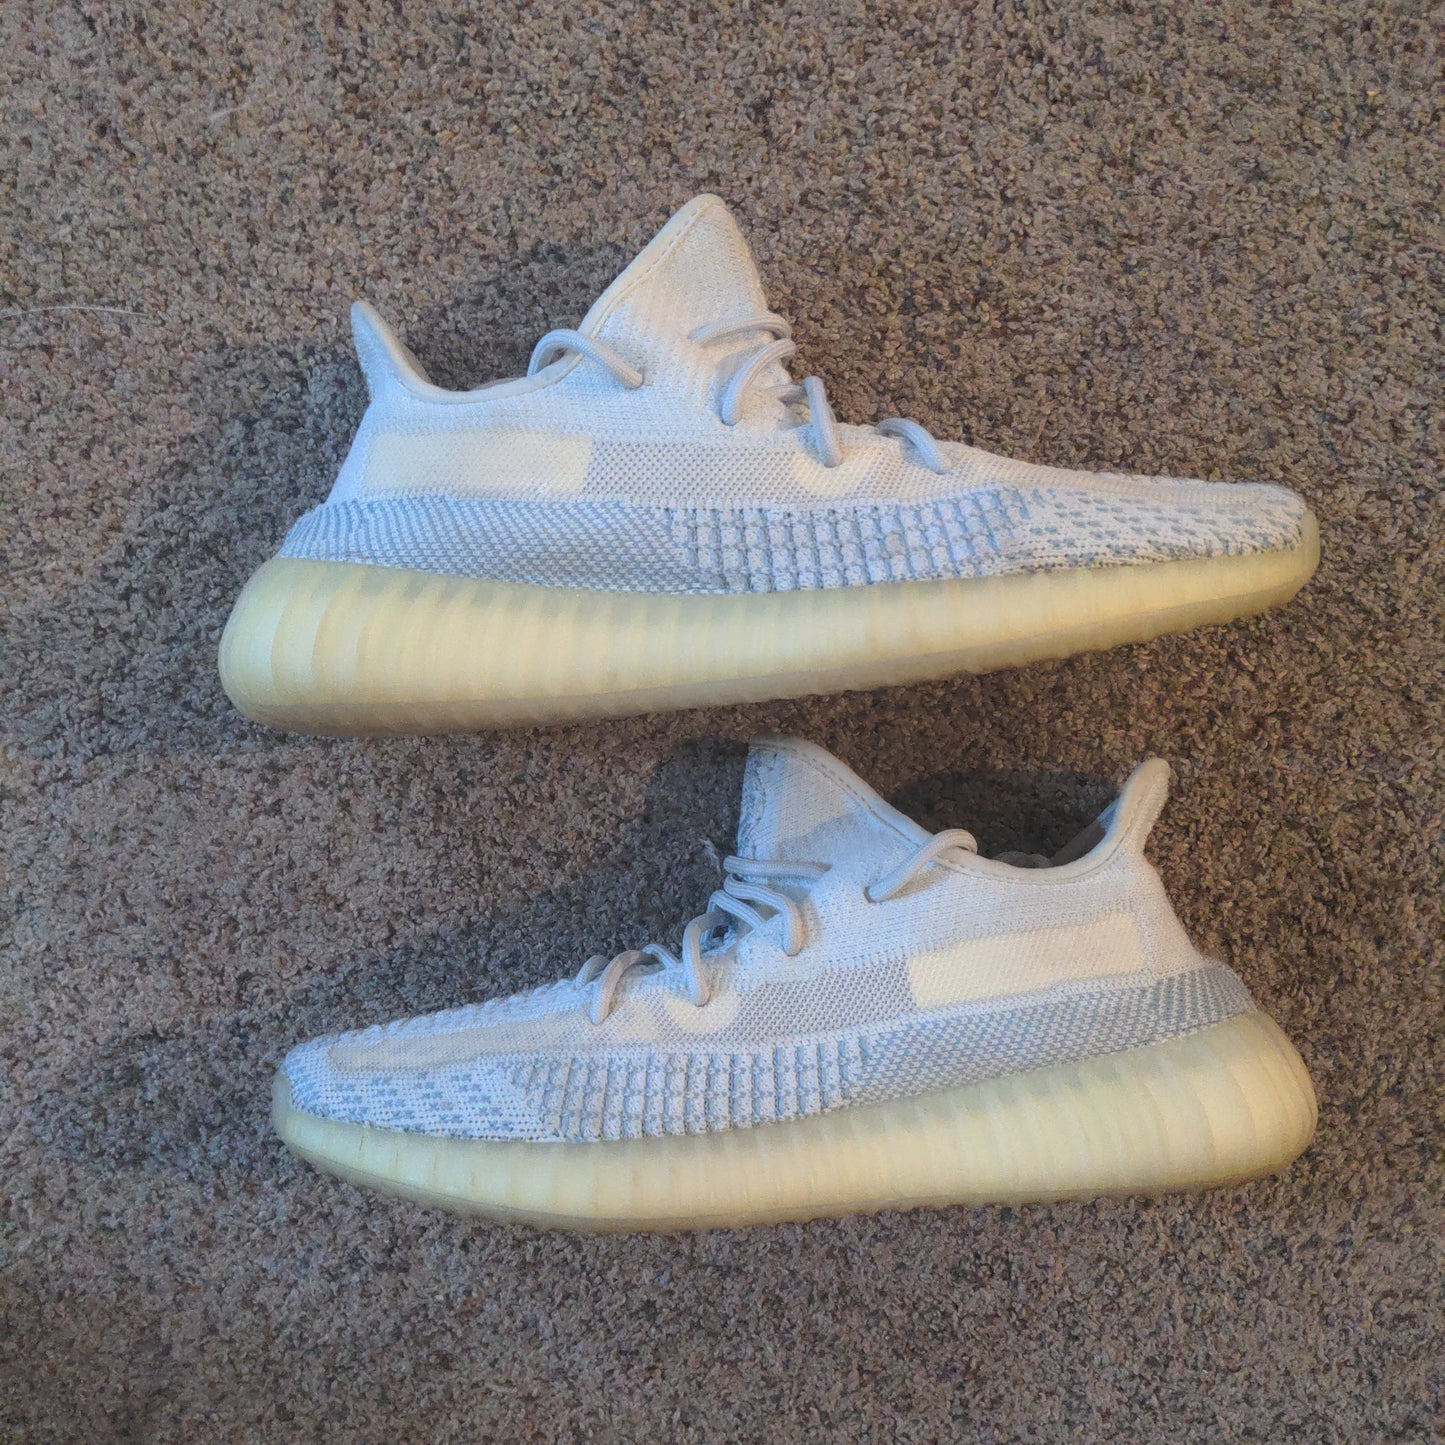 Adidas Yeezy 350v2 - Cloud White - Pre Owned